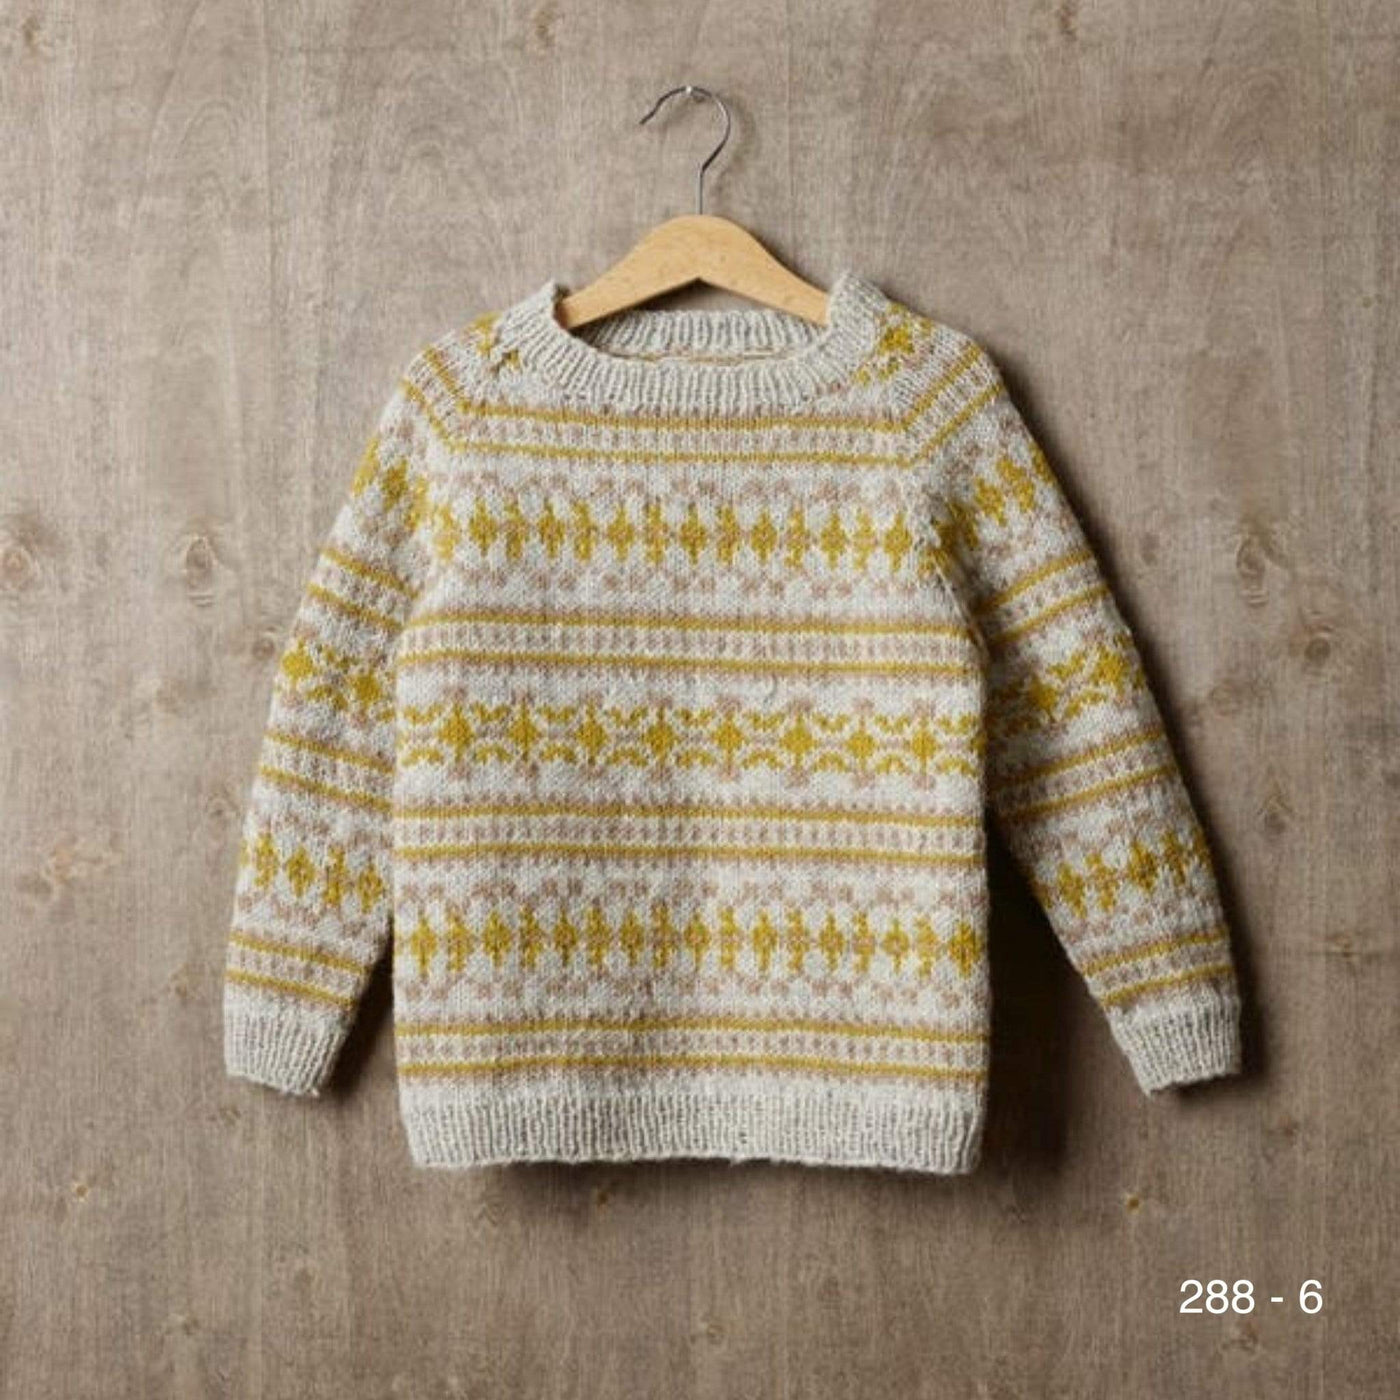 A child's overall colorwork pullover pattern 288-6 knit in Rauma Strikkegarn.